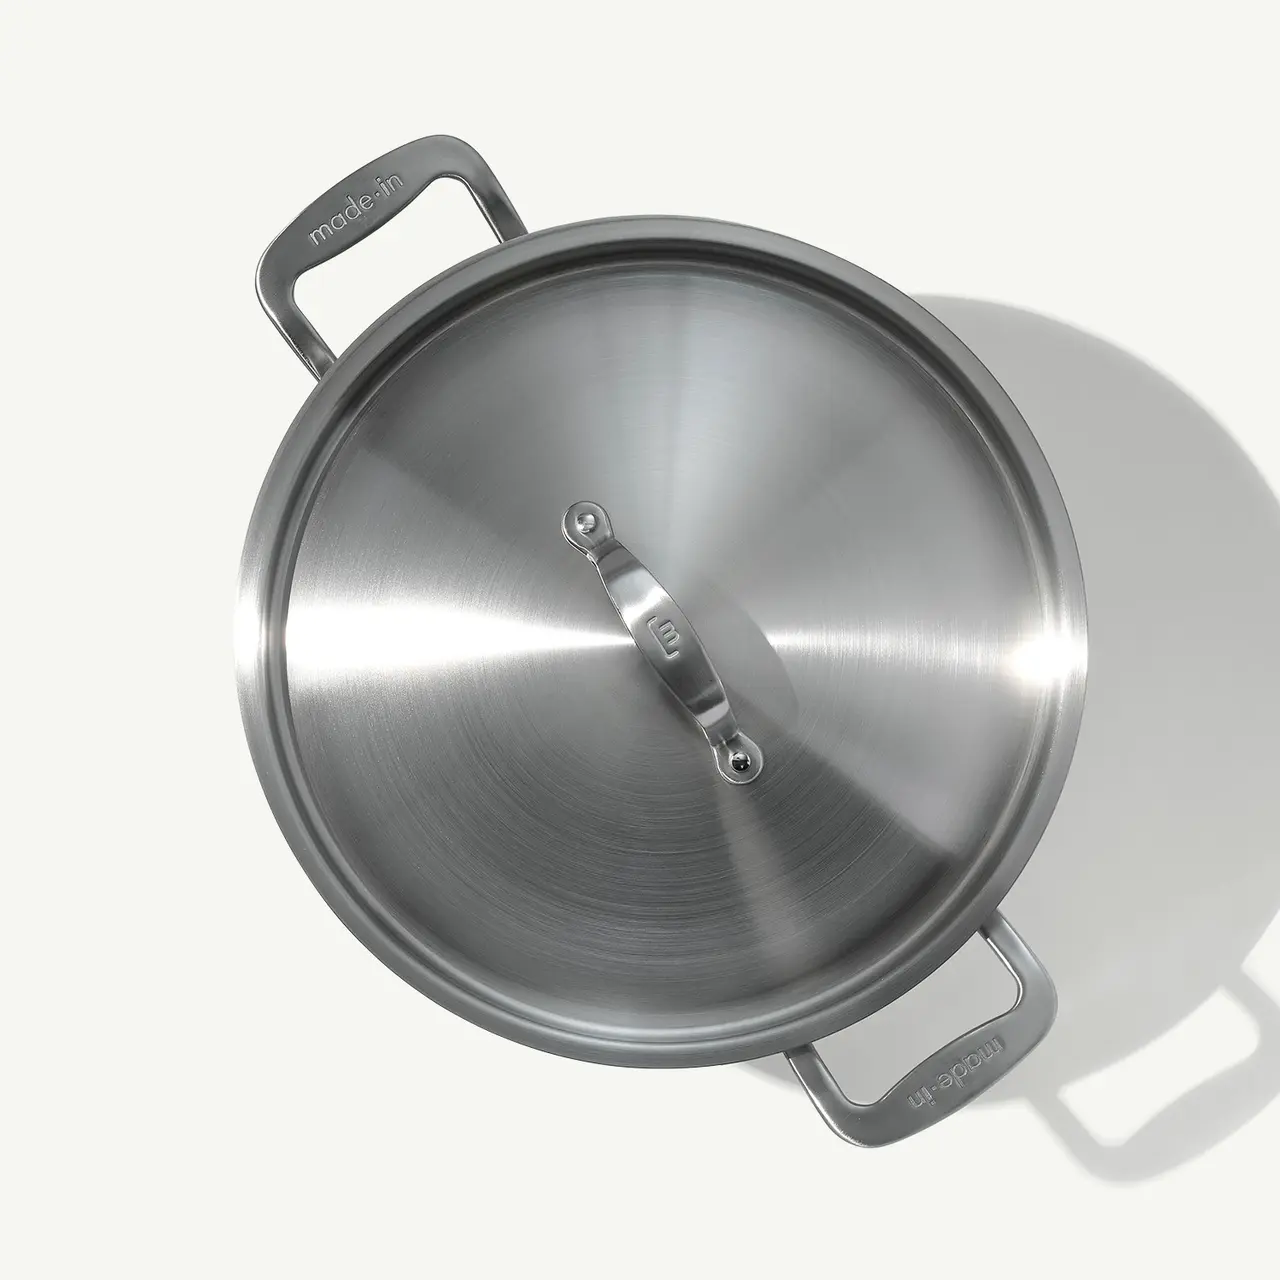 A stainless steel pan with a lid is shown from above, casting a soft shadow on a light surface.